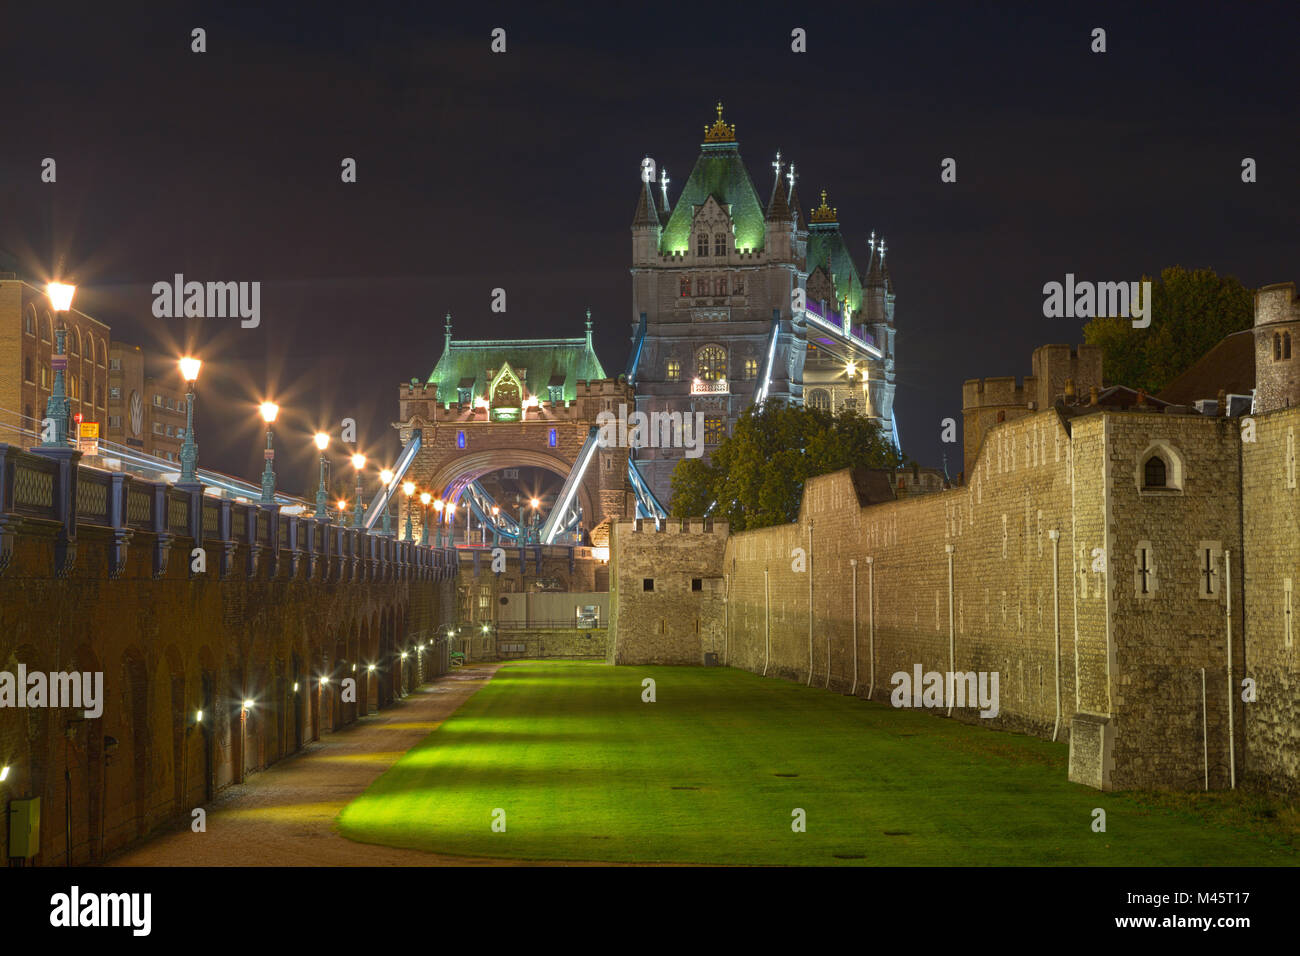 London - The Tower bridge and the moat of Tower at night. Stock Photo